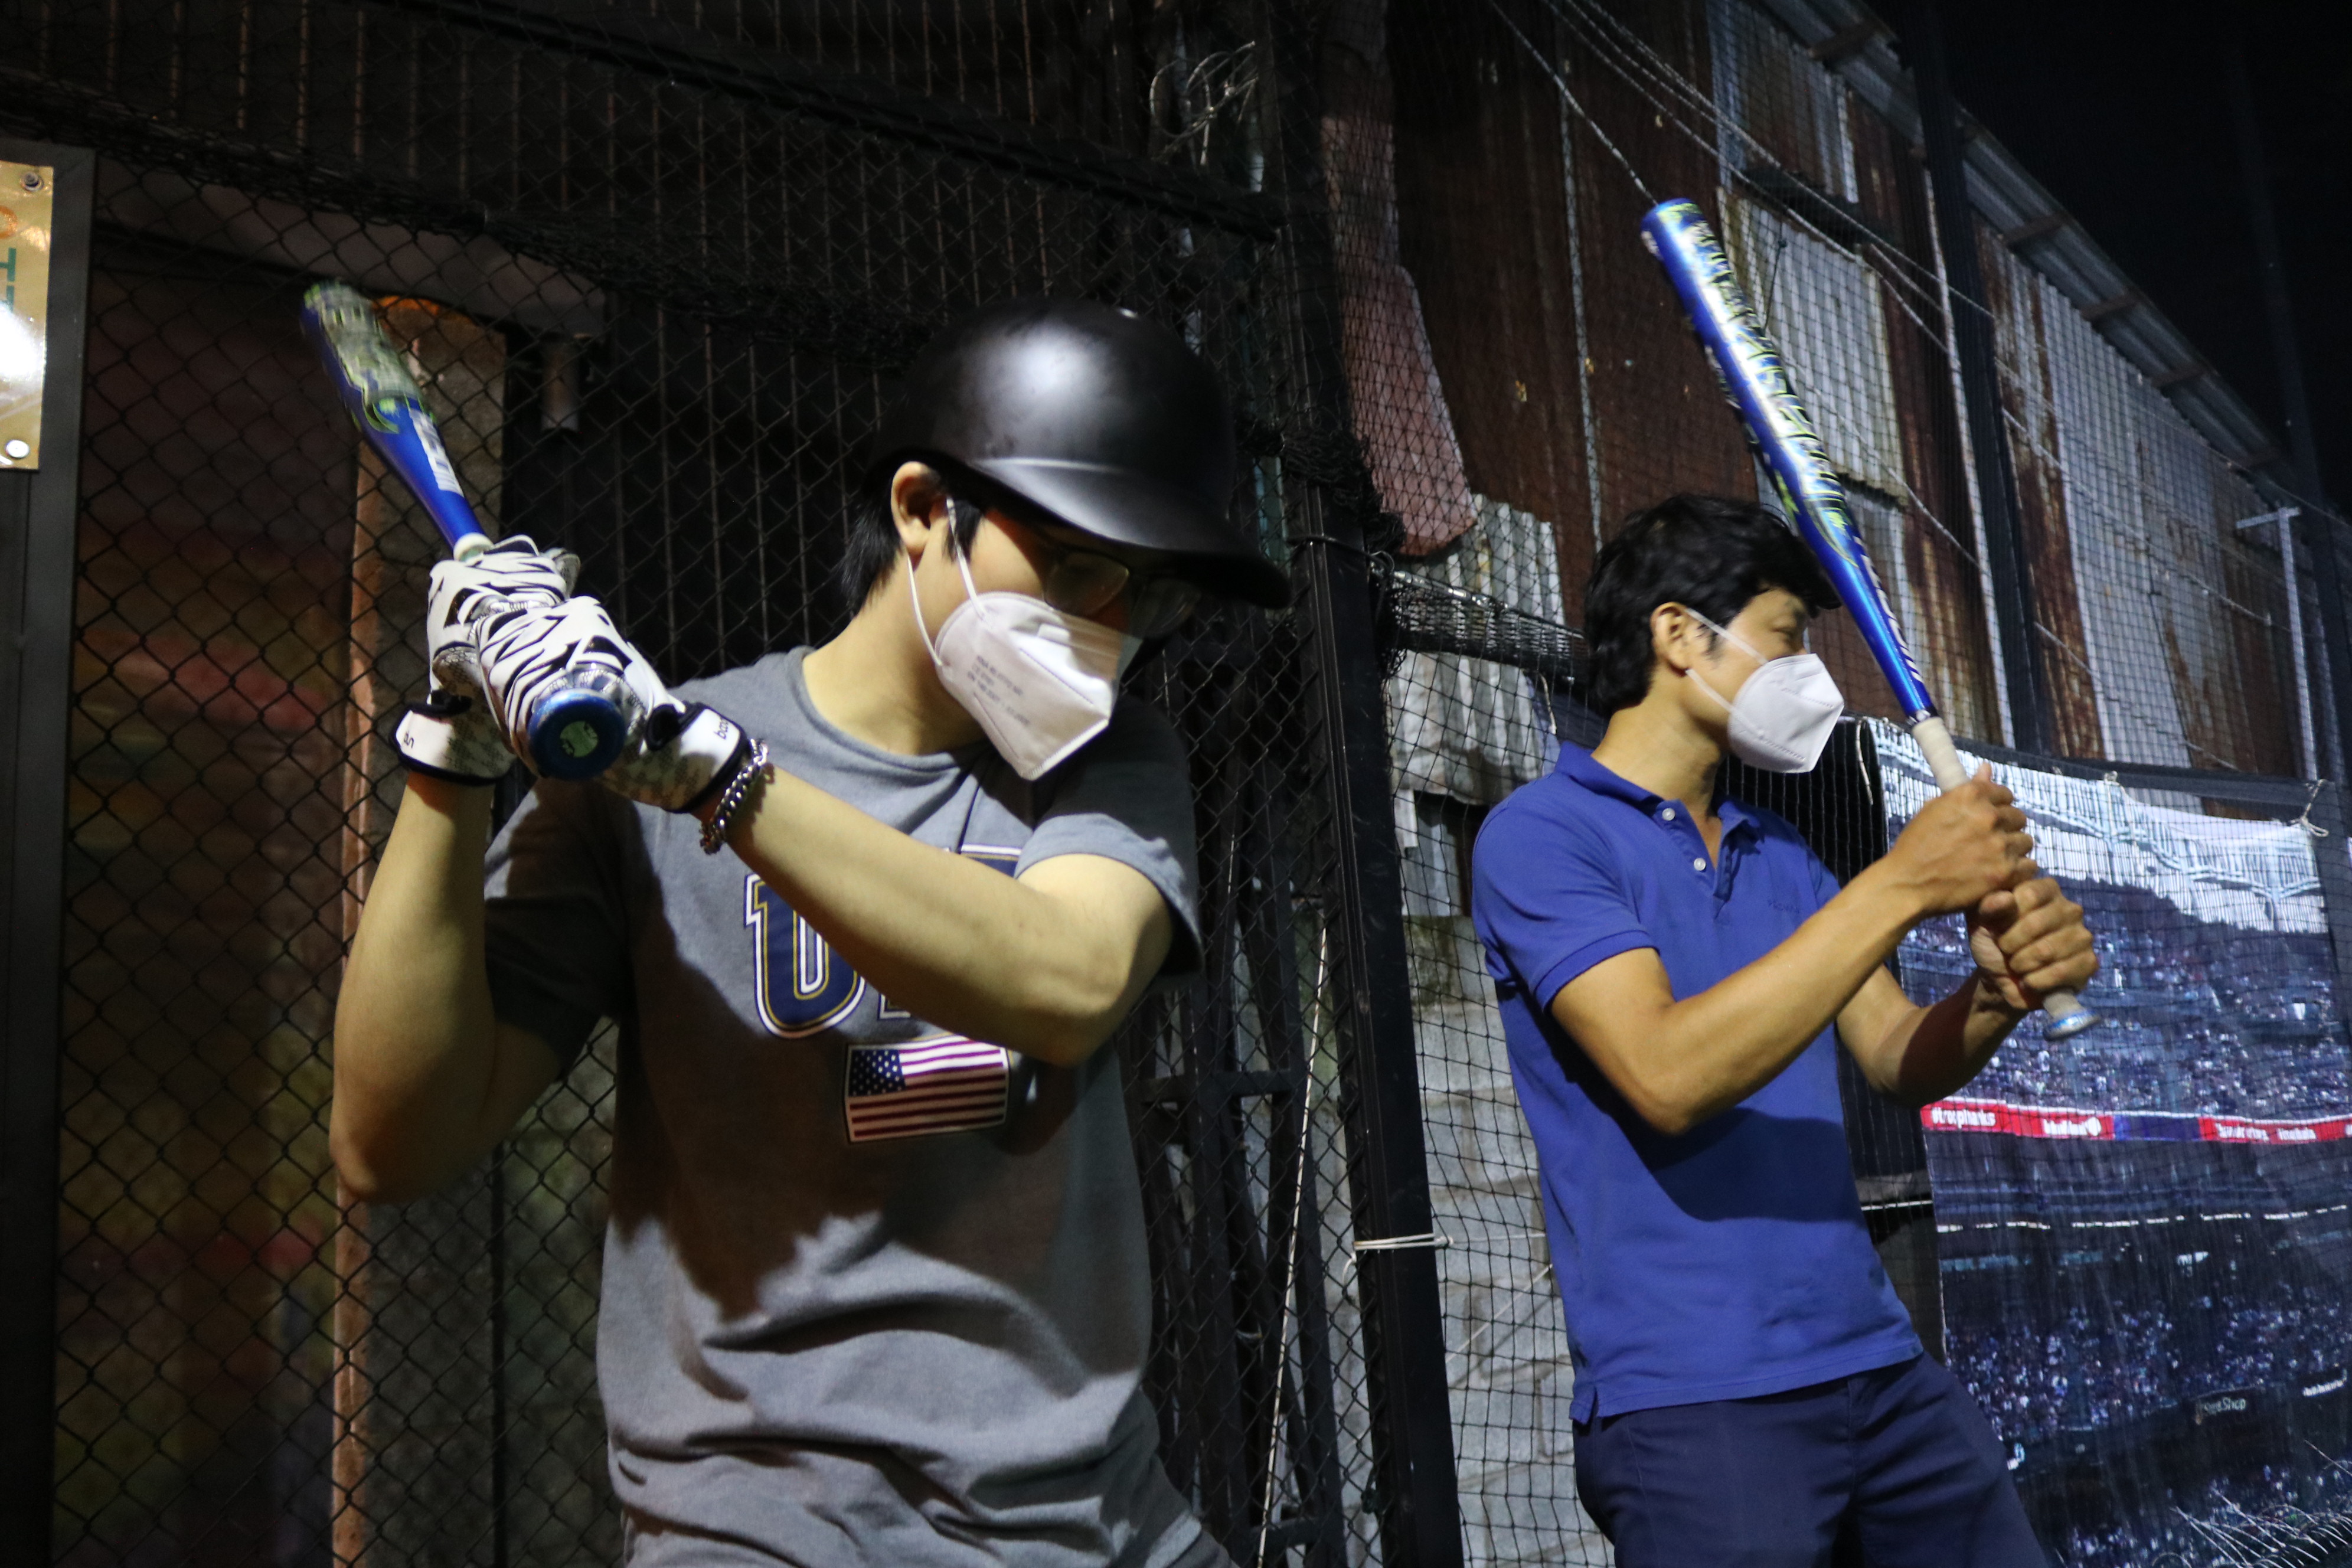 Le Van Tung (right), owner of Baseball Cage, instructs a batter on proper batting posture at Baseball Cage in Ho Chi Minh City’s District 7 on November 17, 2021. Photo: Hoang An / Tuoi Tre News